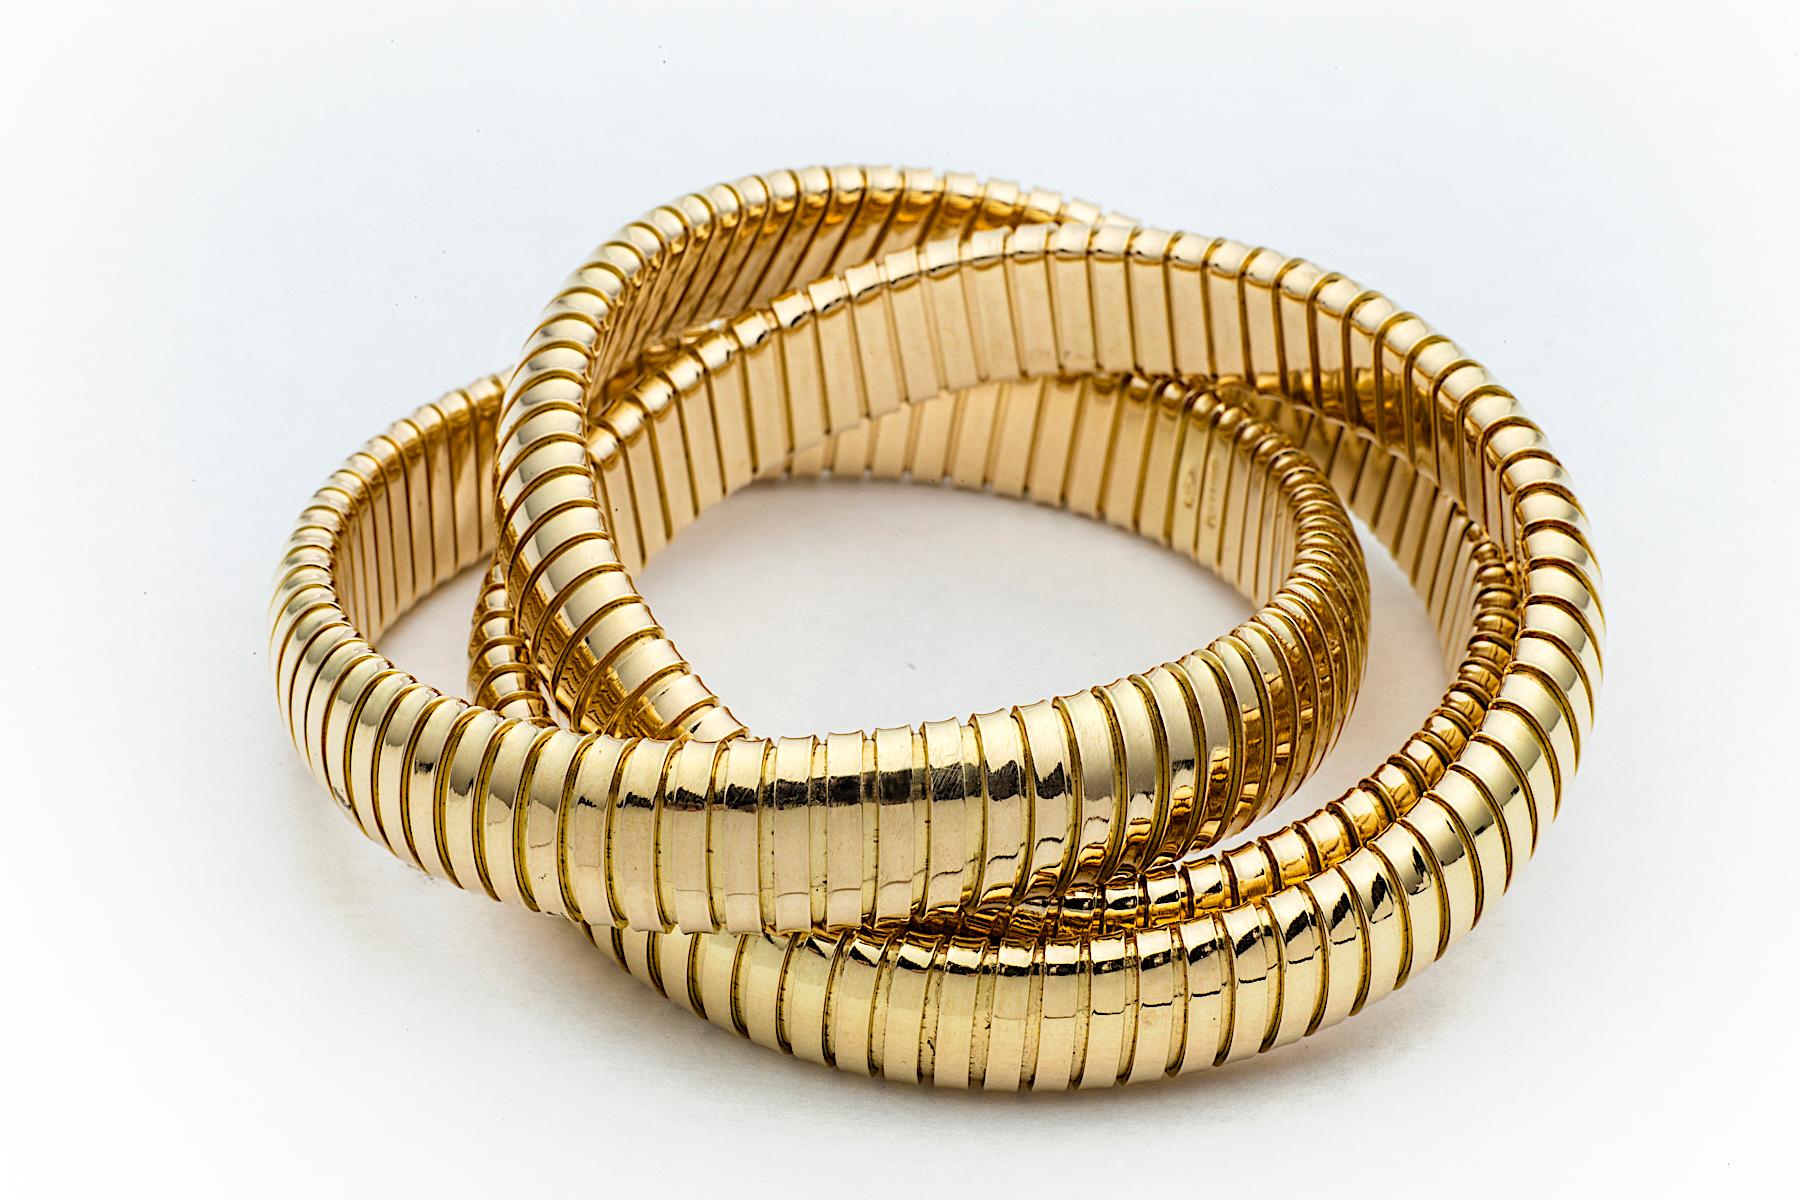 With a timeless but modern style, this chic intertwined three strand 12mm tubogas rolling bangle bracelet was originally inspired by the flexible automotive gas tubing of the 1920’s. Translated into luxurious 18 karat yellow gold and easily stacked